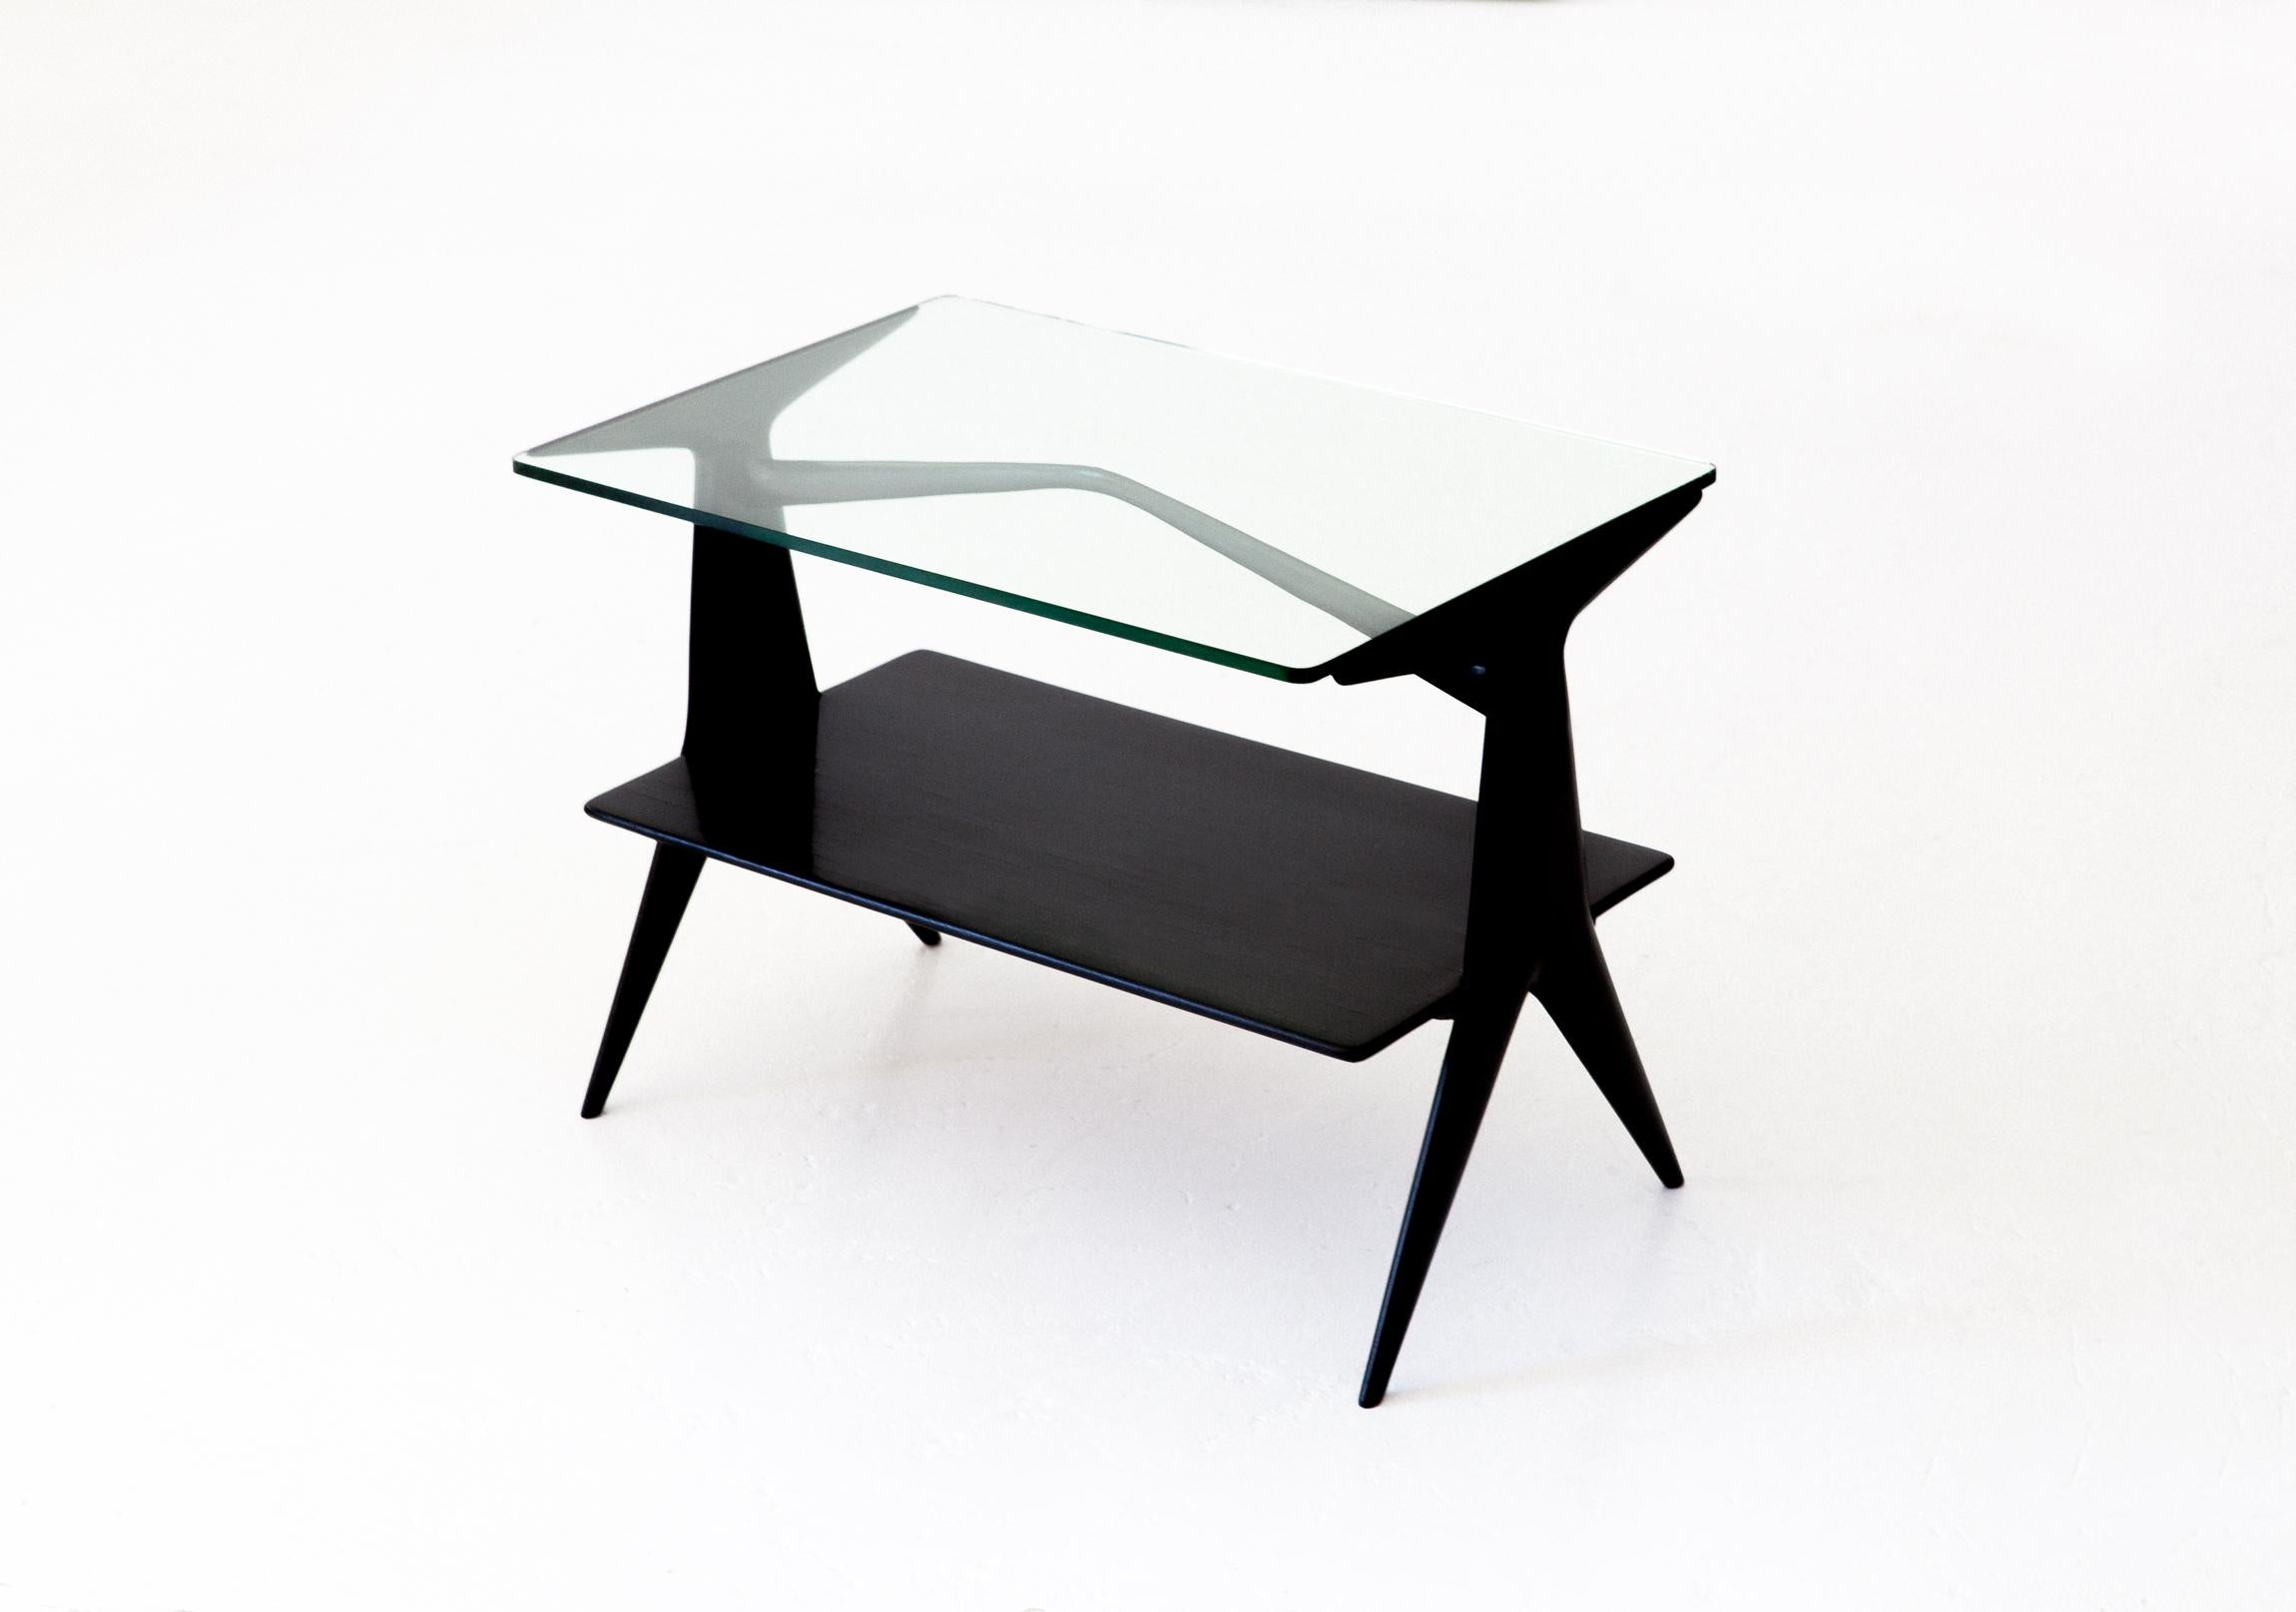 A sculptural and airy low table manufactured in Italy in 1950s
Solid mahogany wood with glass top. Completely restored, hand polished with natural shellac, aniline black stained .This kind of restoration has required a week of work.
Its shape is